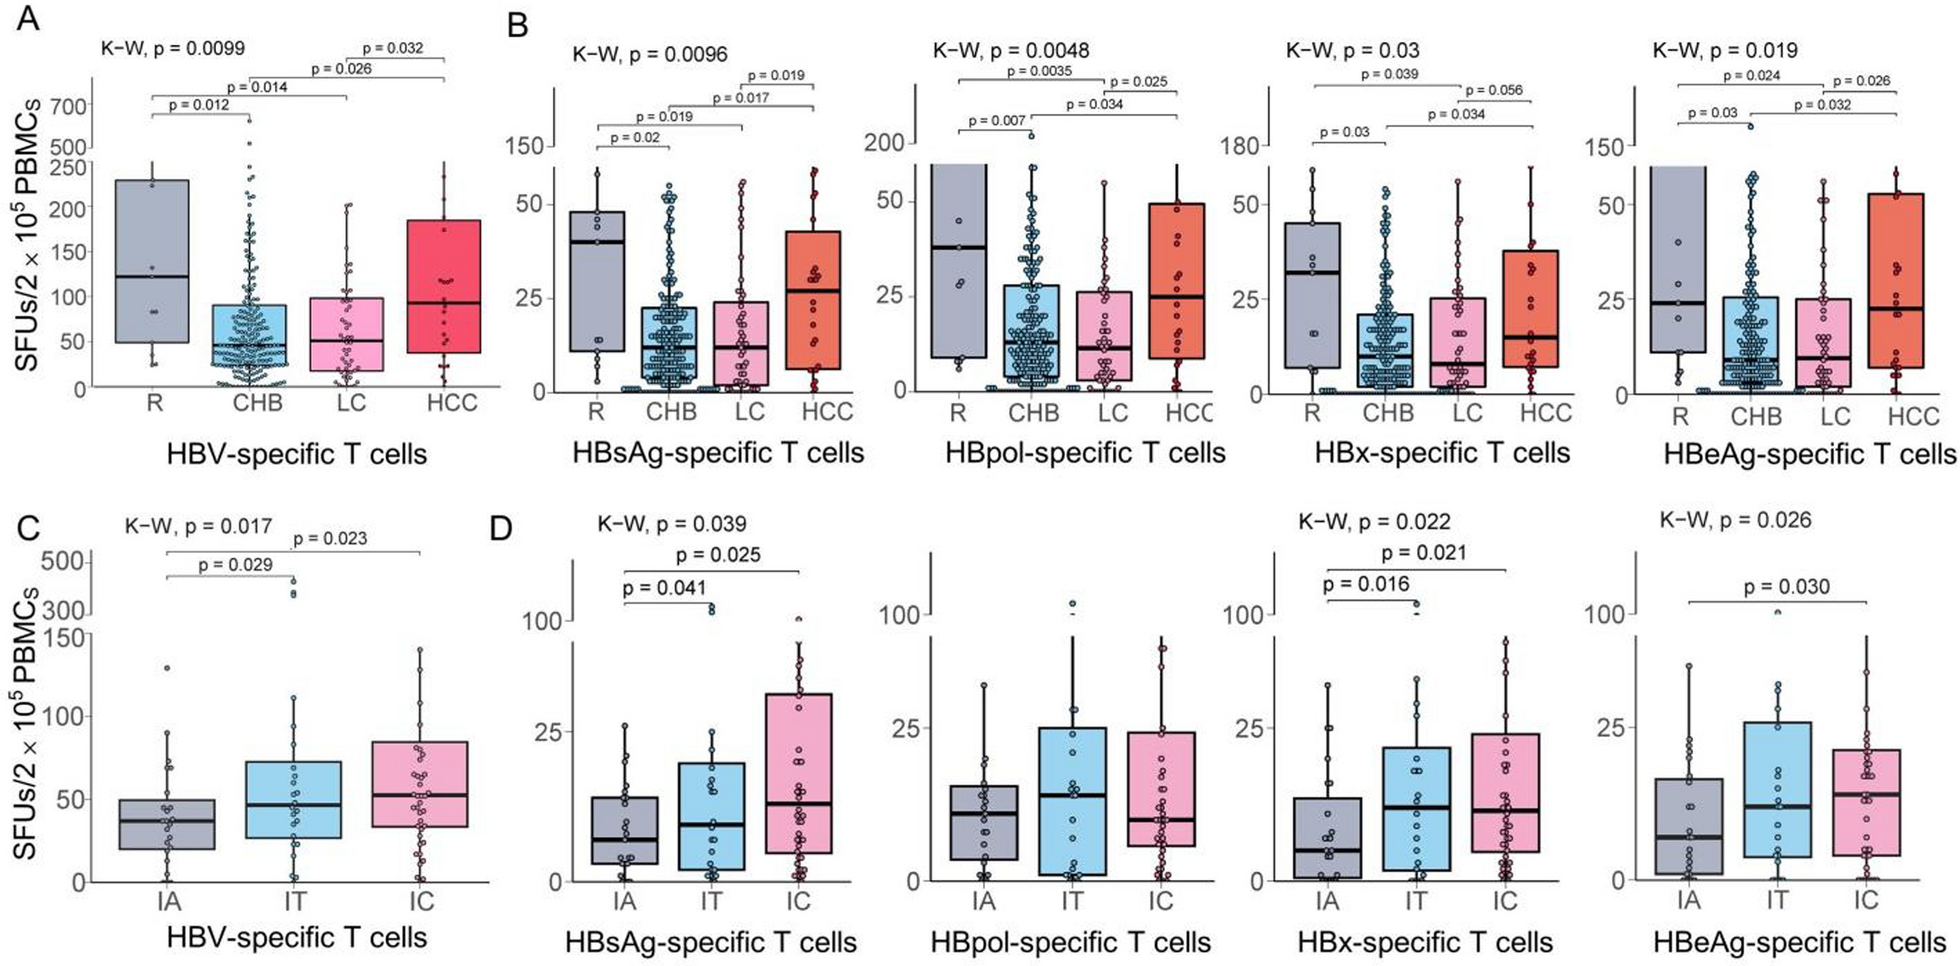 Routine evaluation of HBV-specific T cell reactivity in chronic hepatitis B using a broad-spectrum T-cell epitope peptide library and ELISpot assay